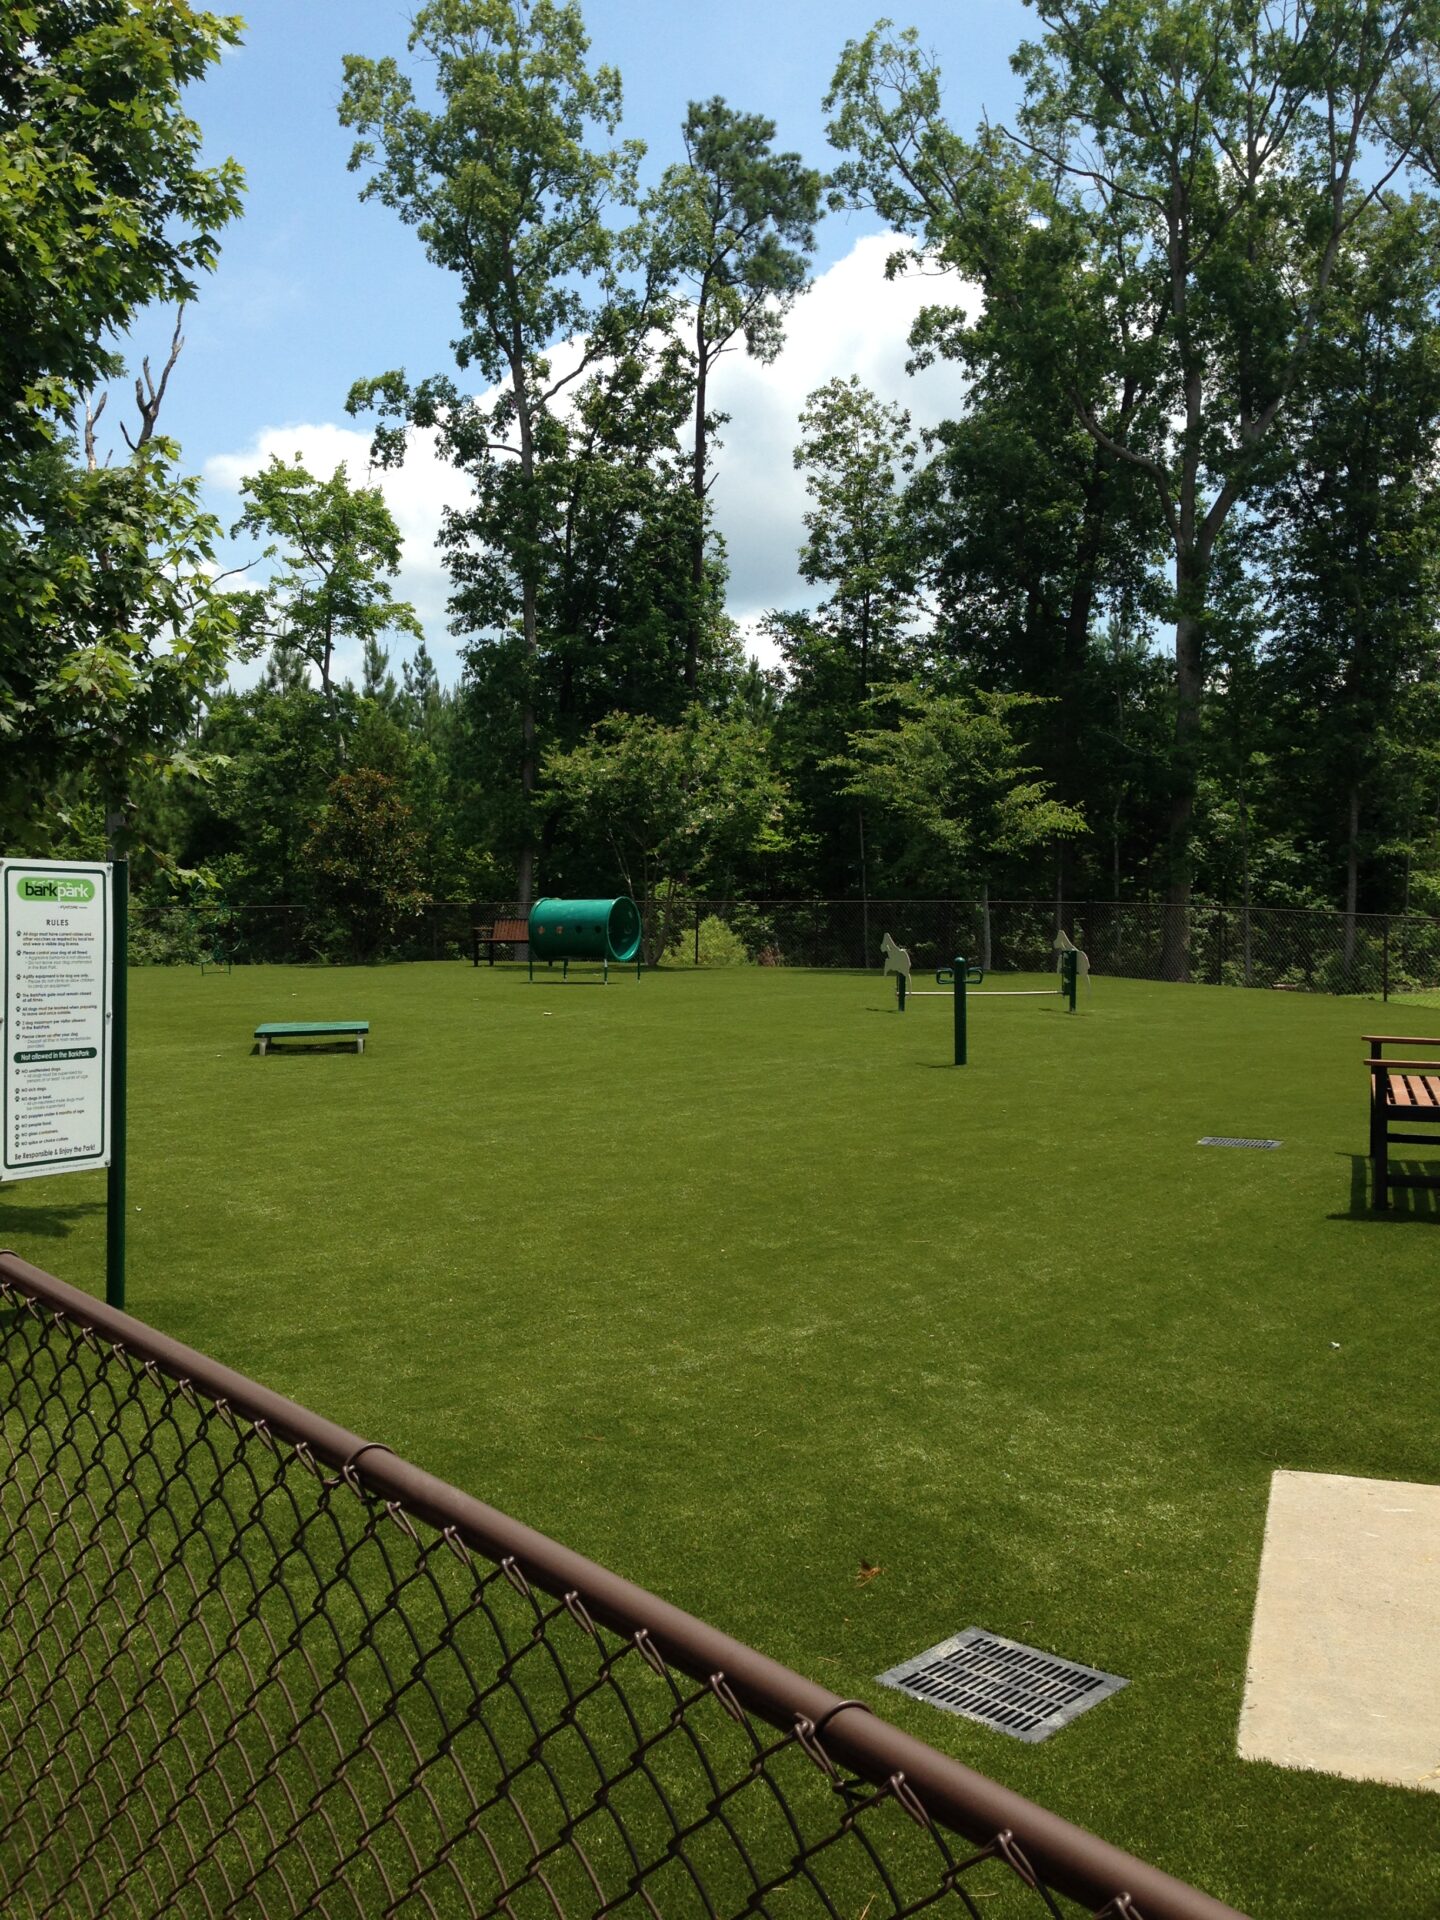 A fenced dog park with artificial grass, a green tunnel, benches, surrounded by trees on a sunny day, with a clear blue sky overhead.